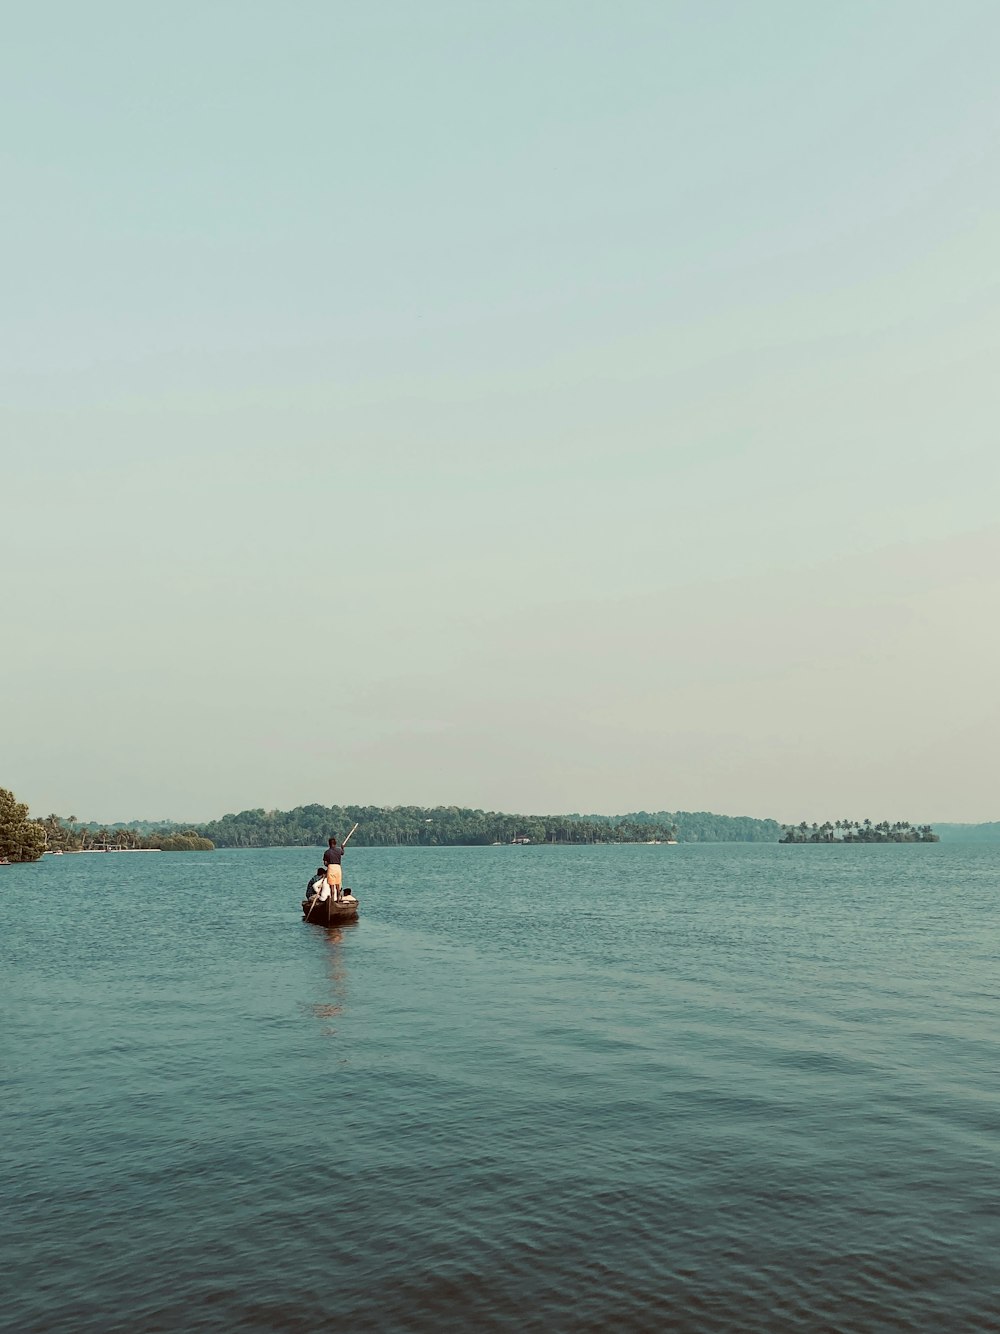 a person in a small boat on a large body of water